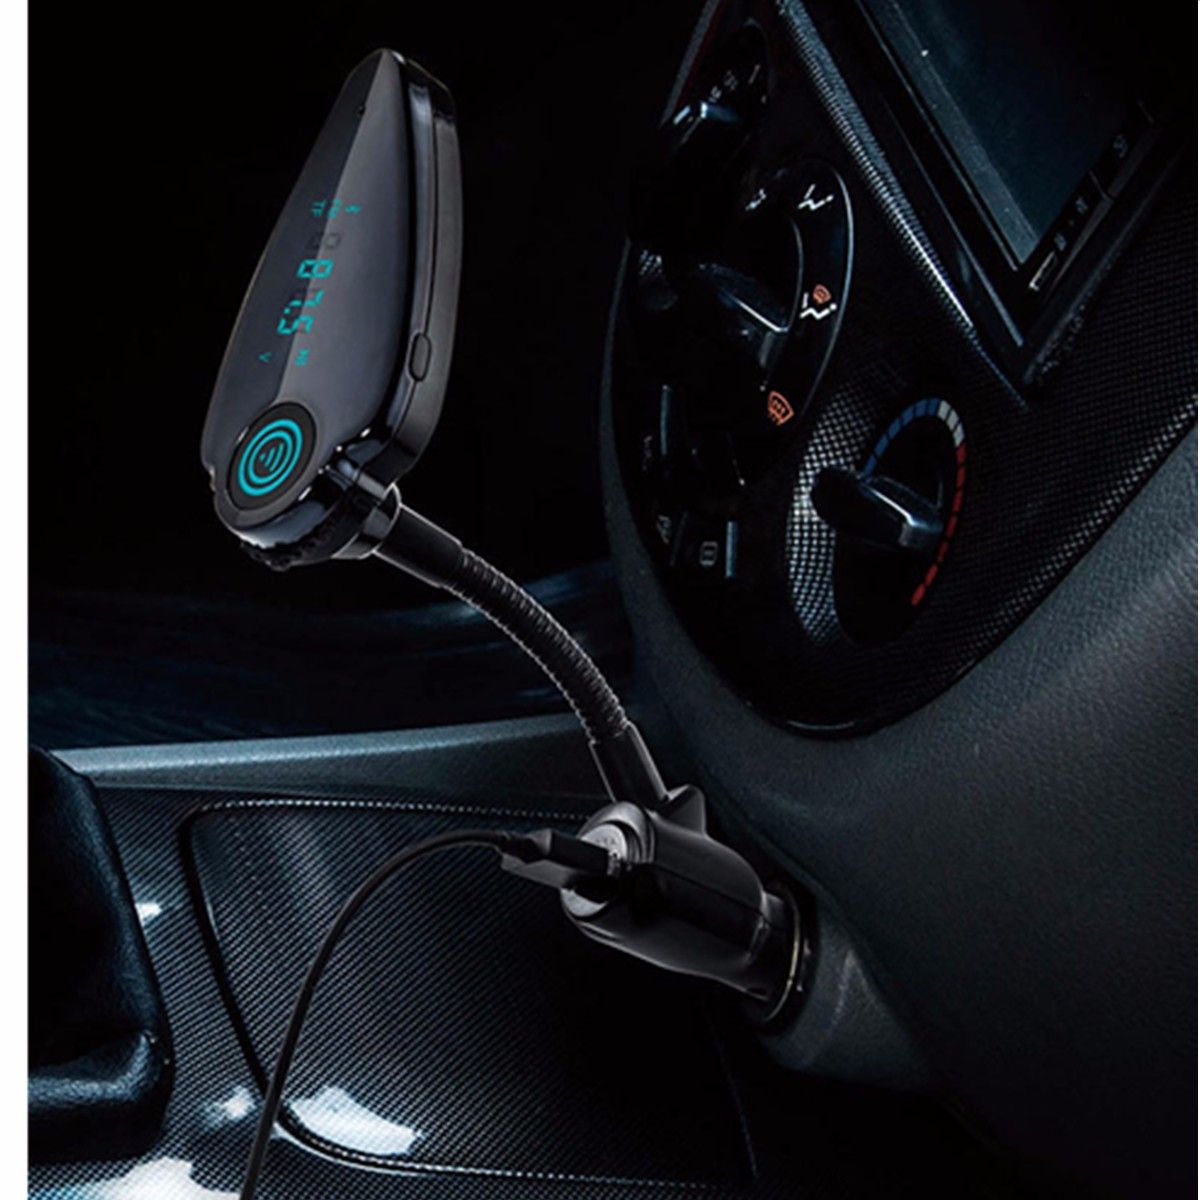 T6-LCD-Display-Car-Charger-bluetooth-Hands-Free-FM-Transmitter-Built-in-Microphone-MP3-Player-1336103